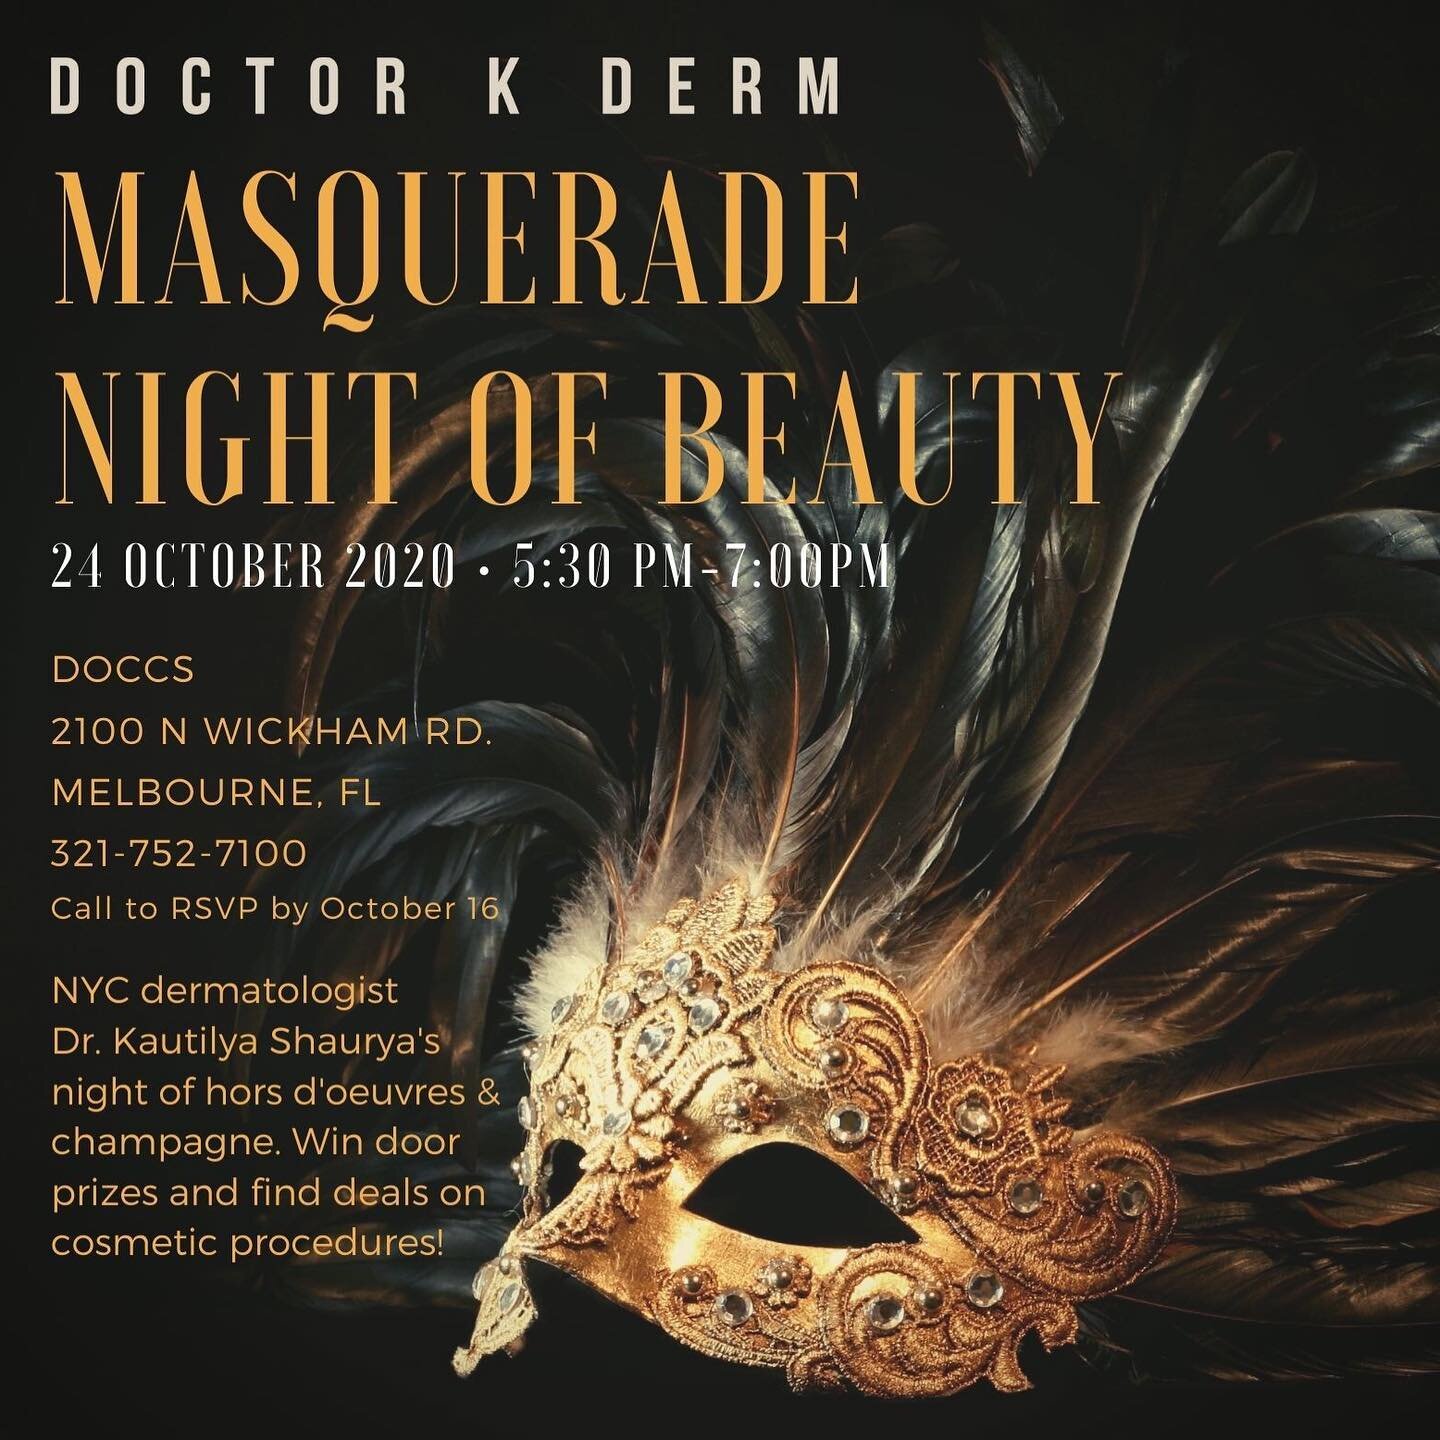 DOCCS Dermatology will be hosting an Open House on Saturday, October 24 from 5:30-7:30pm at its new office at 2100 N. Wickham Rd!

The theme is masquerade- so bring your best mask (and one that&rsquo;s effective).&nbsp;Rapid COVID tests will be offer